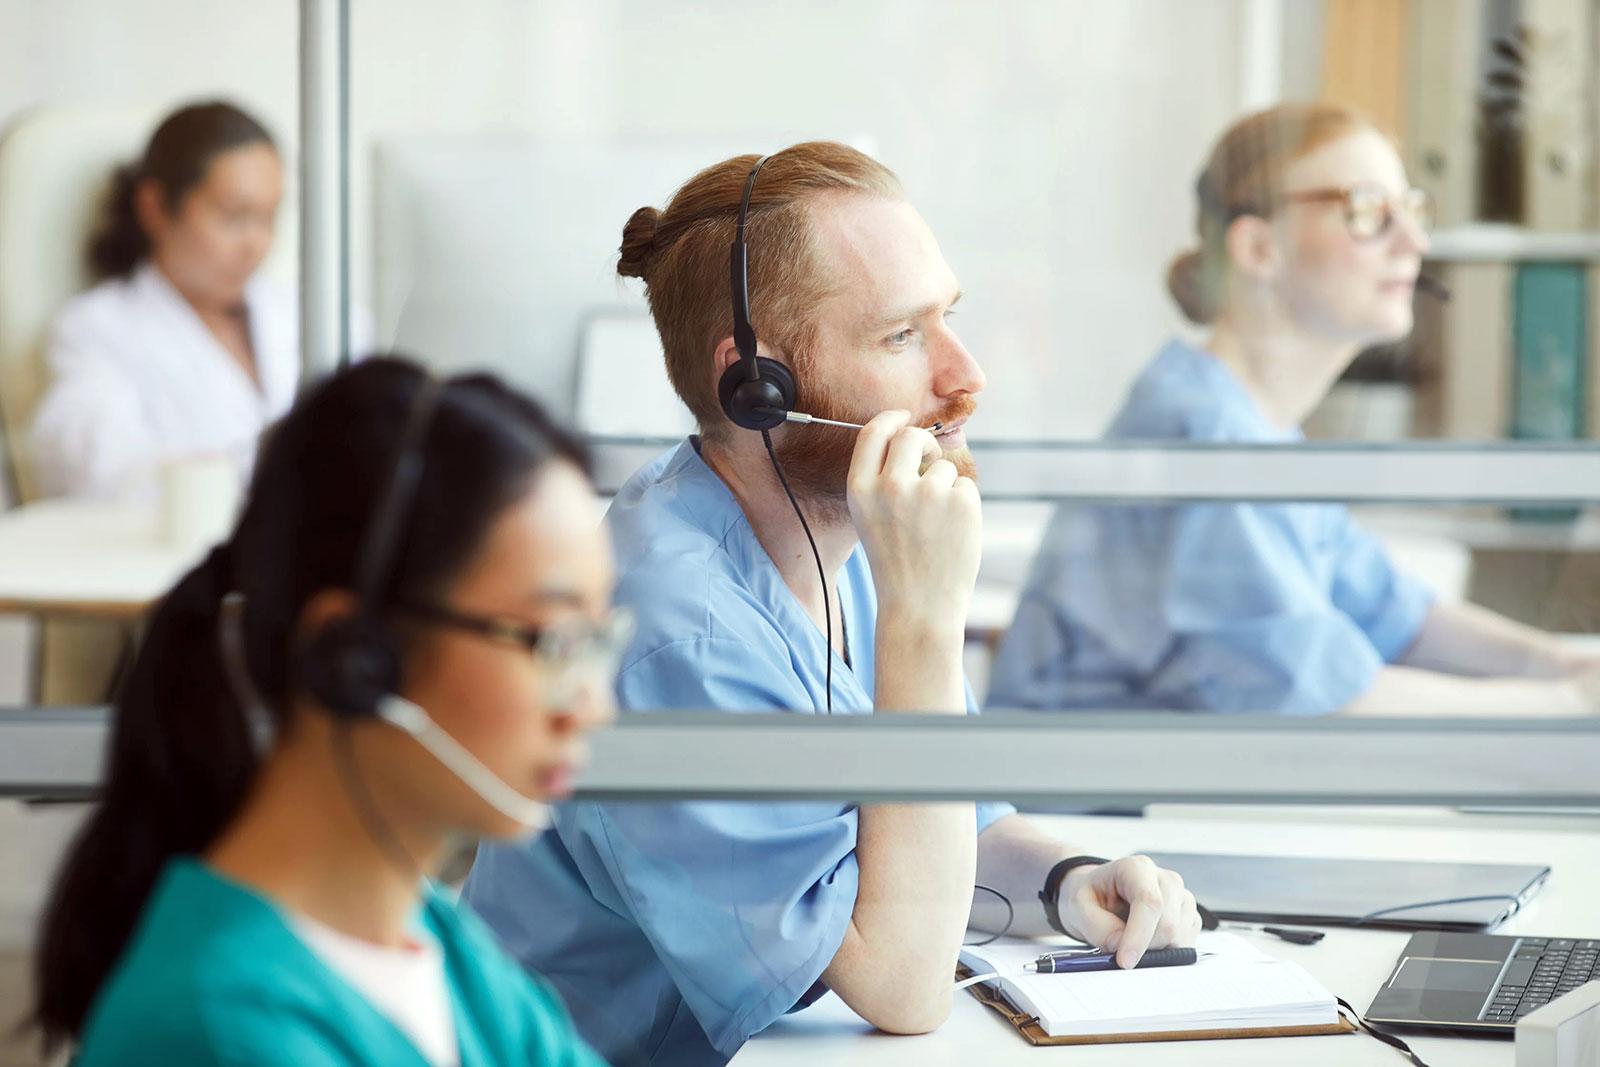 With demand for mental health services higher than ever, digital transcription services can help the NHS streamline processes